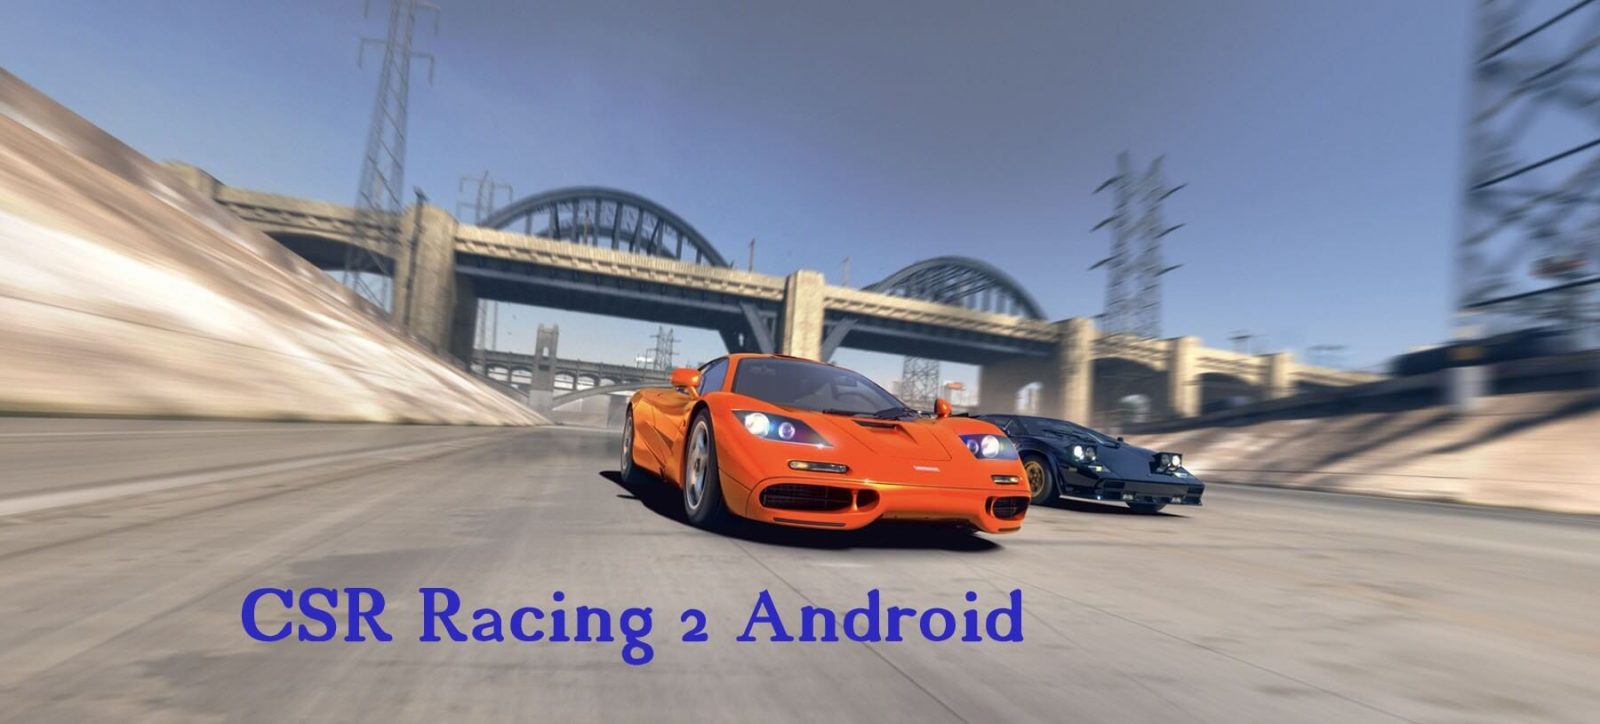 CSR Racing 2 Apk Android 2020 and 2021